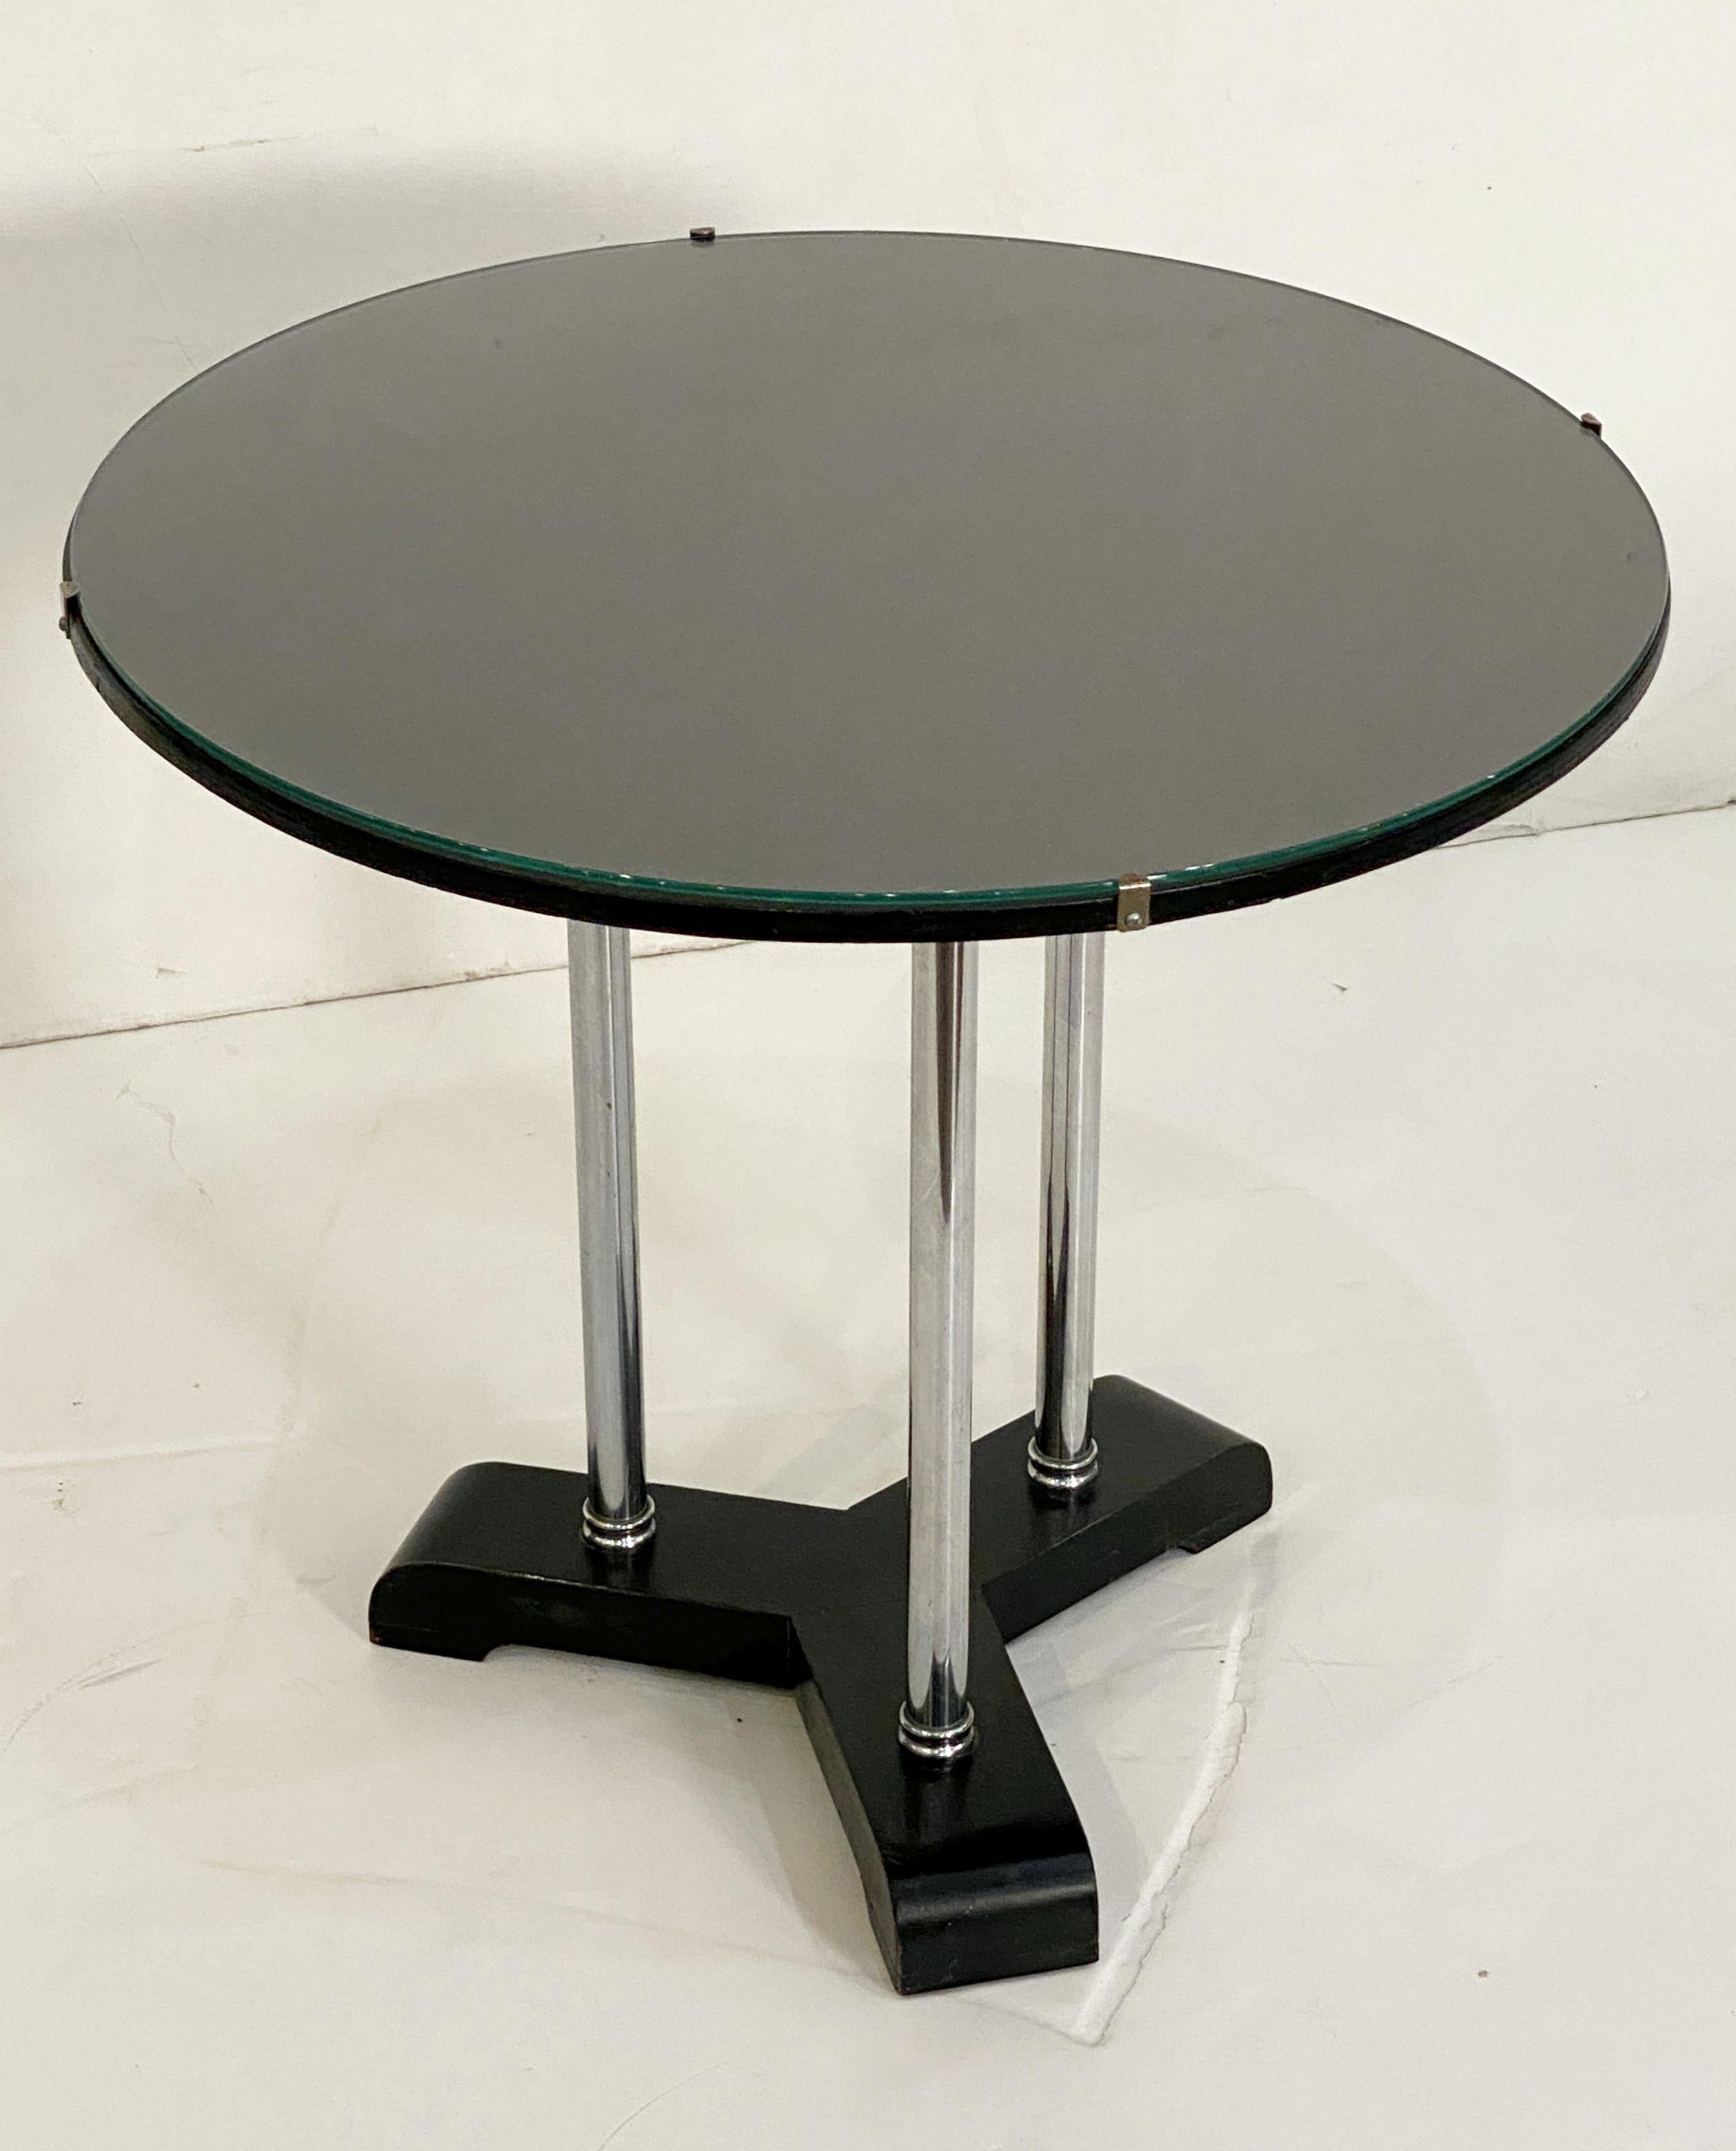 English Art Deco Round Drinks Tripod Table of Chrome, Ebonized Wood, and Glass For Sale 3